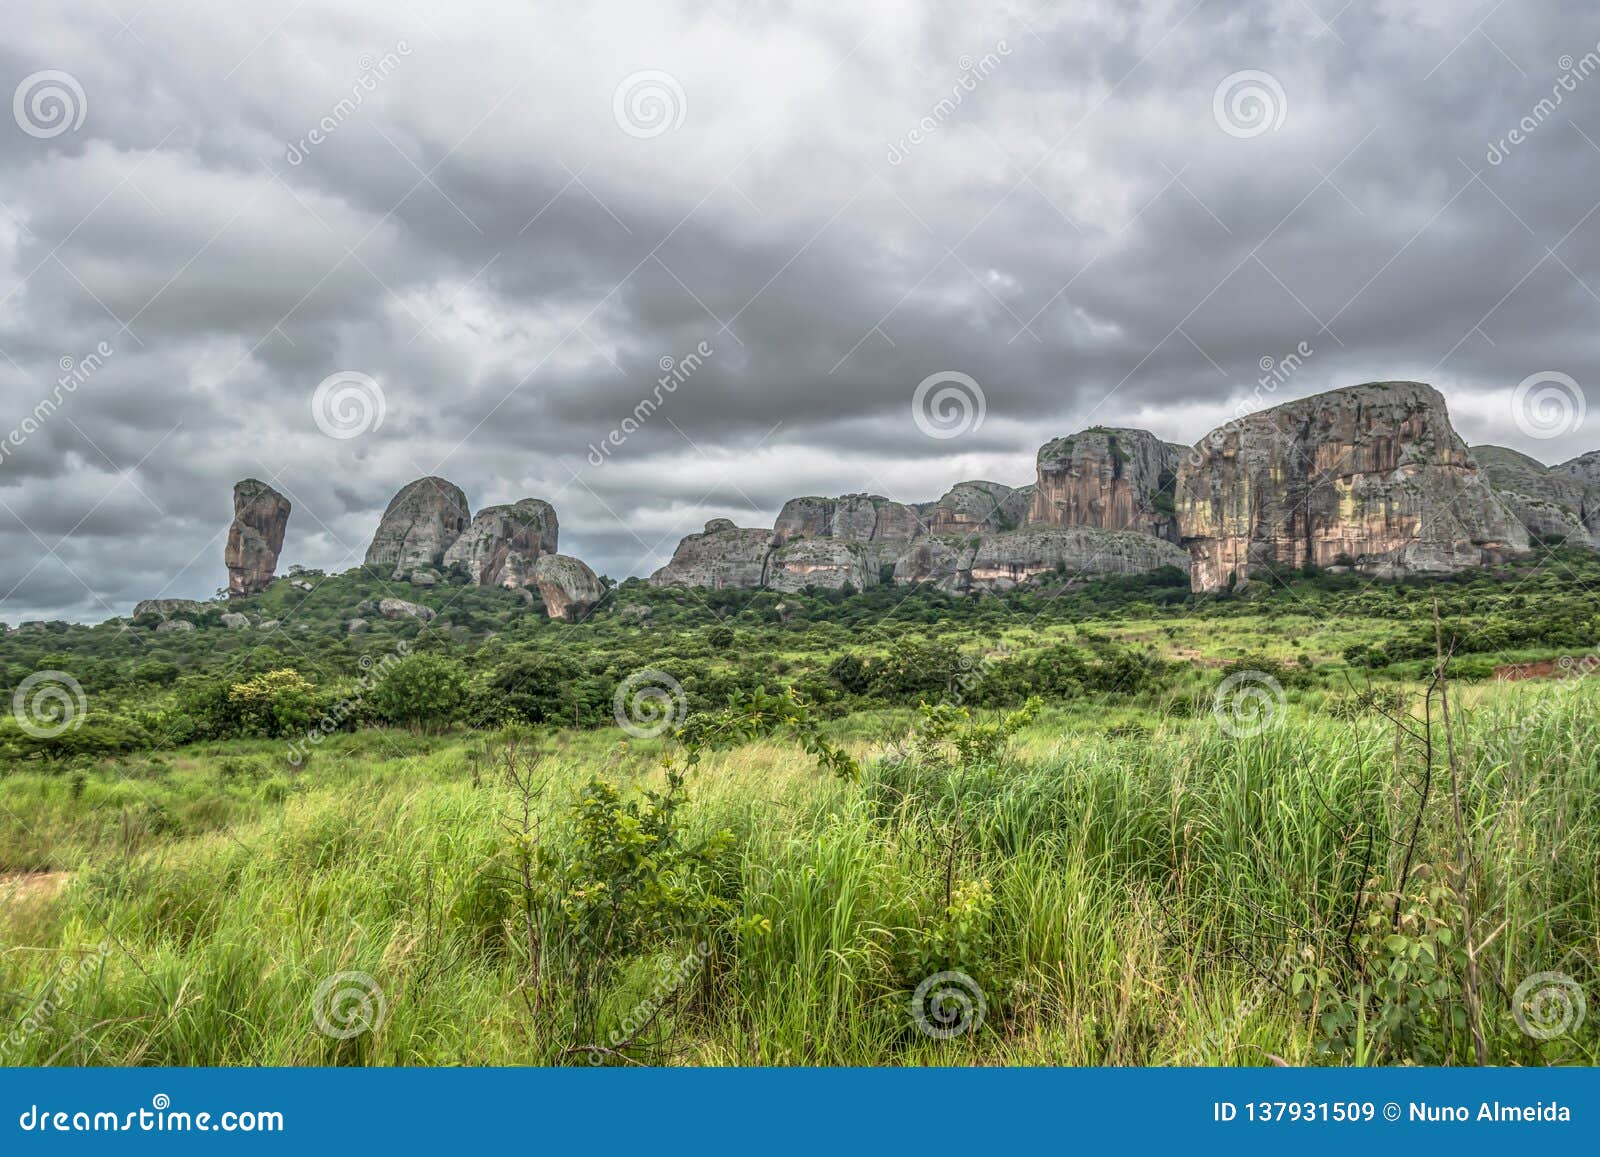 view at the mountains pungo andongo, pedras negras (black stones), huge geologic rock s